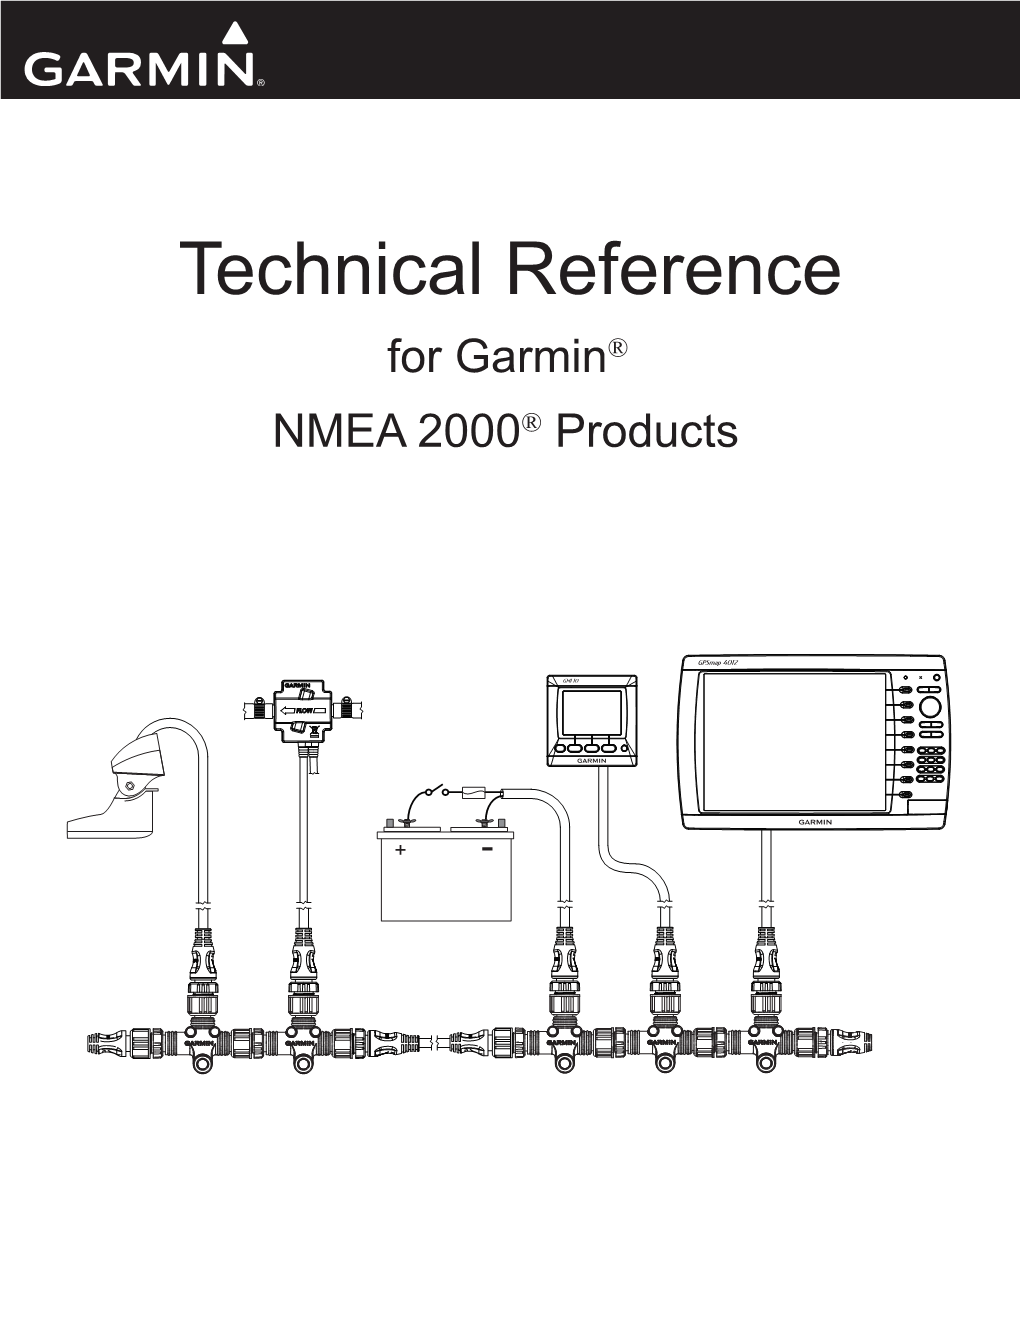 Technical Reference for Garmin NMEA 2000 Products Iii Table of Contents